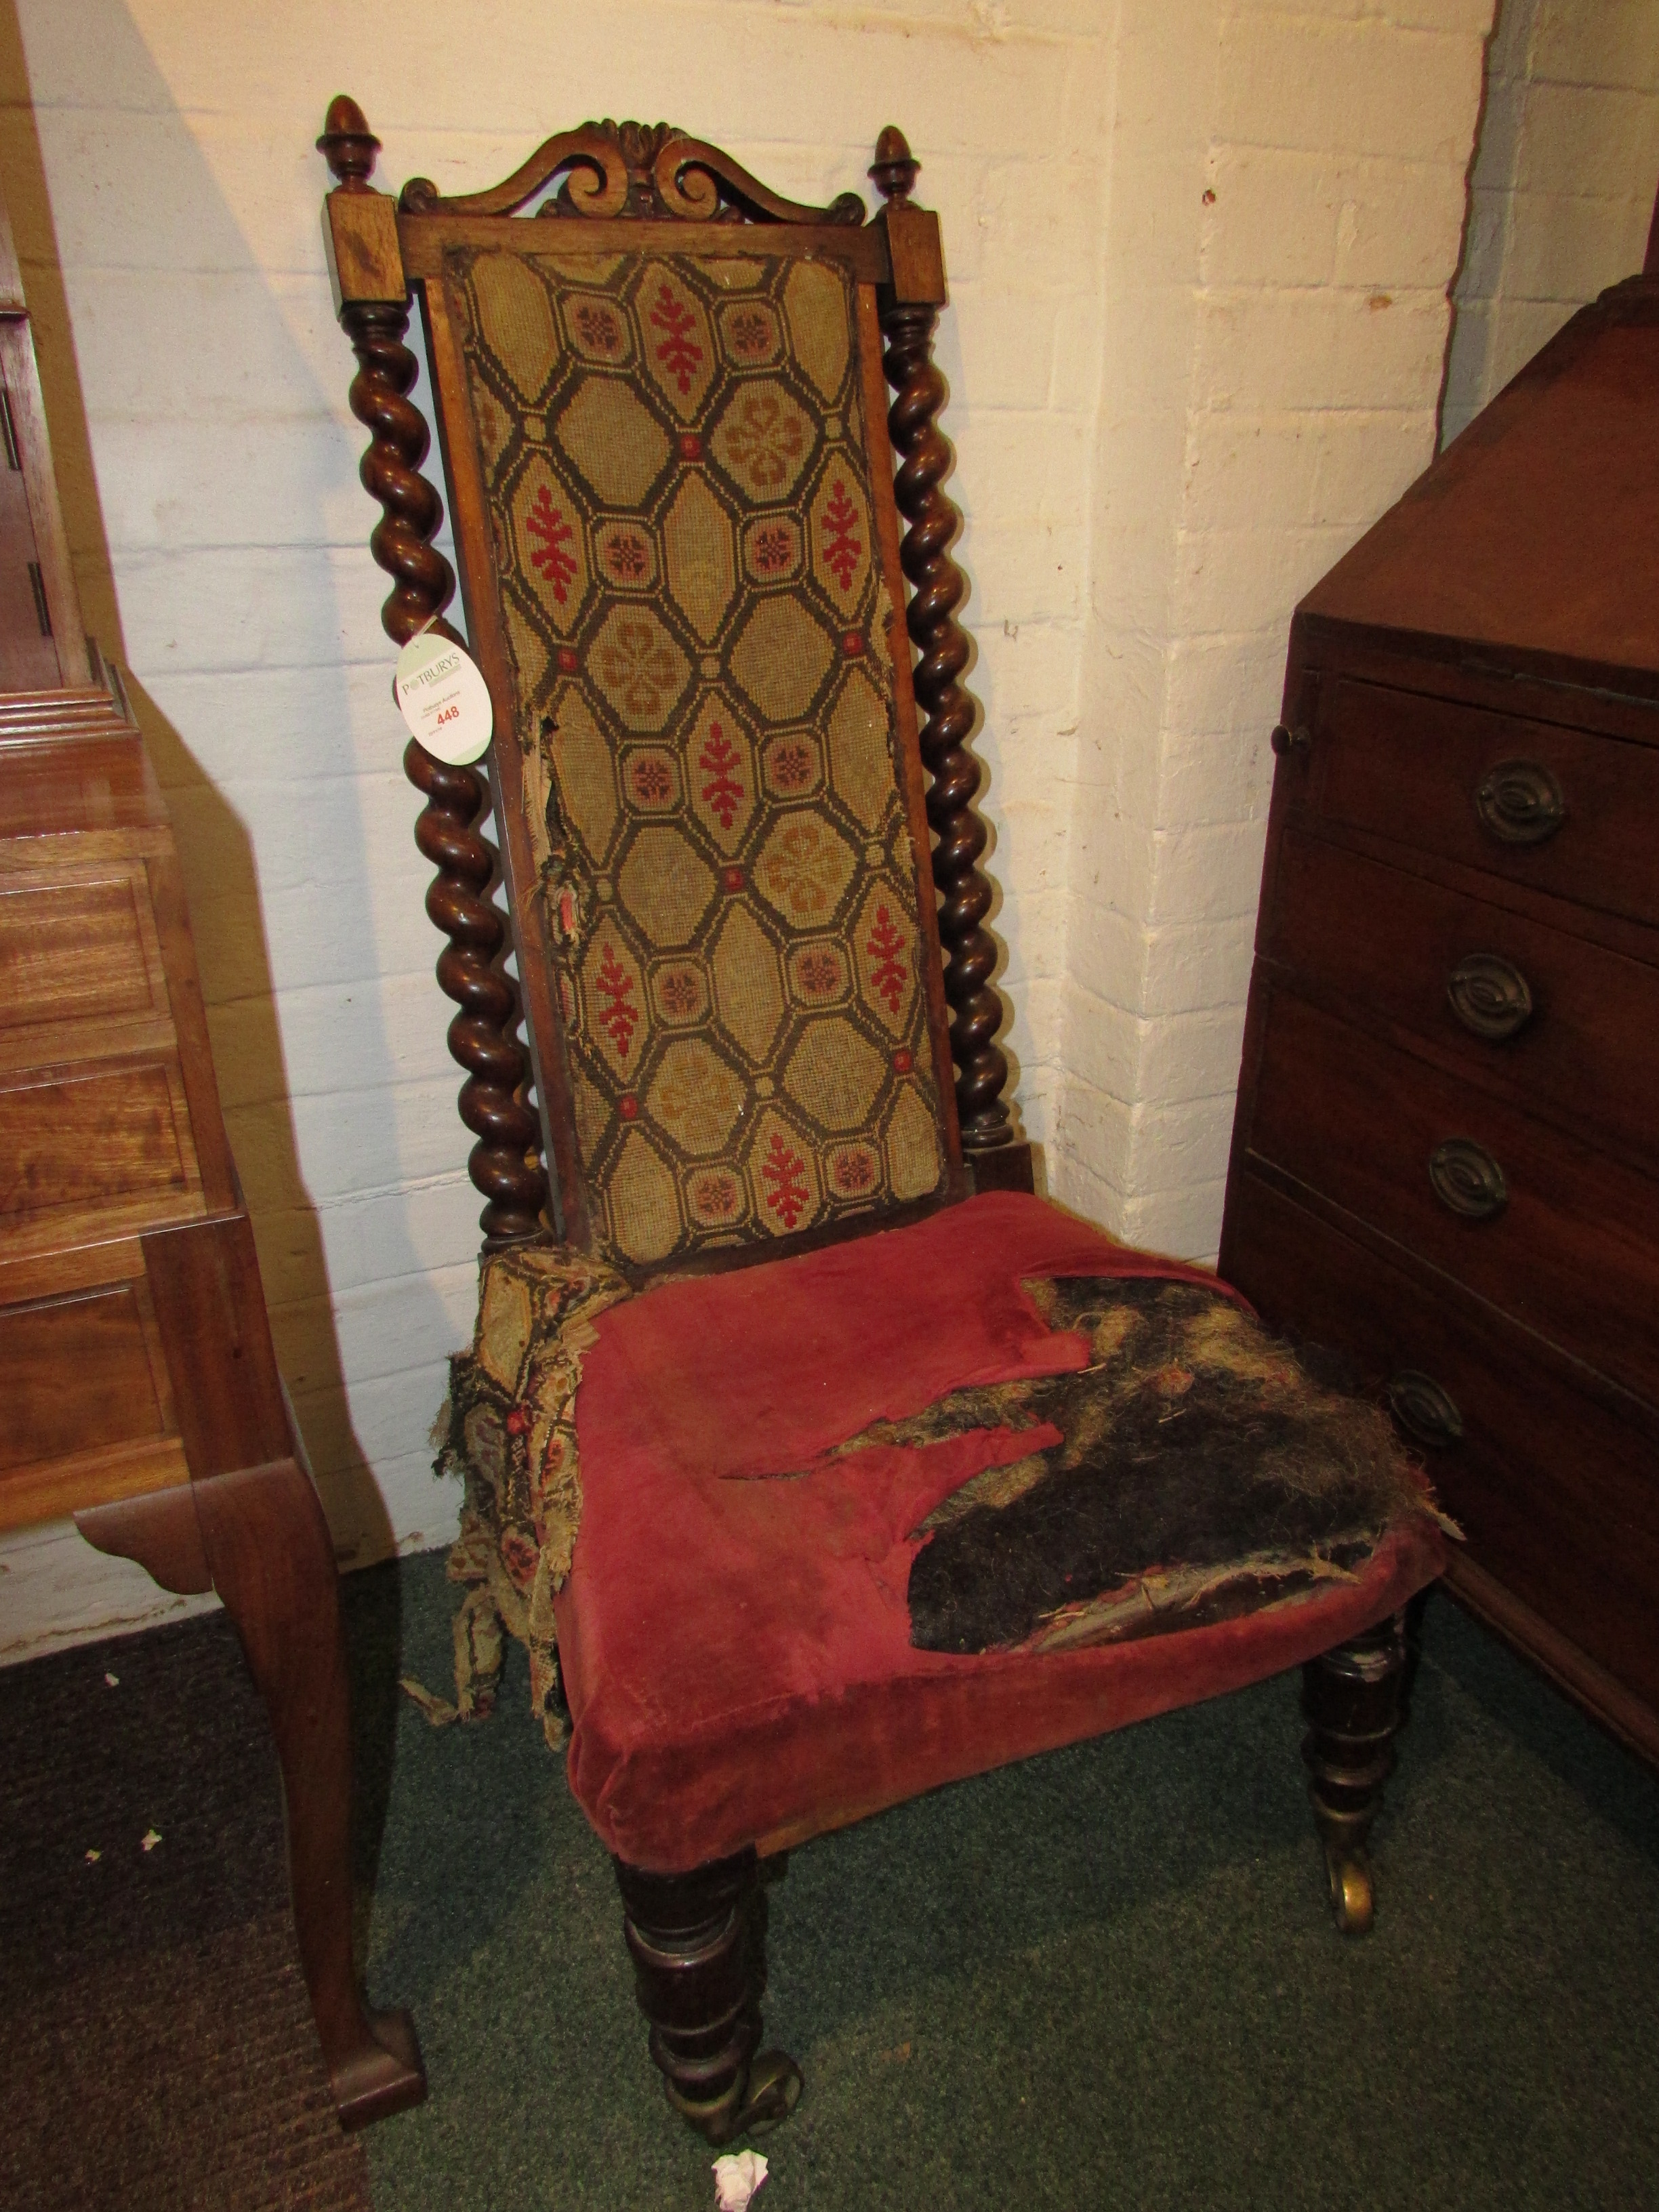 An early 19th century oak framed long back chair with barley twist side supports and central